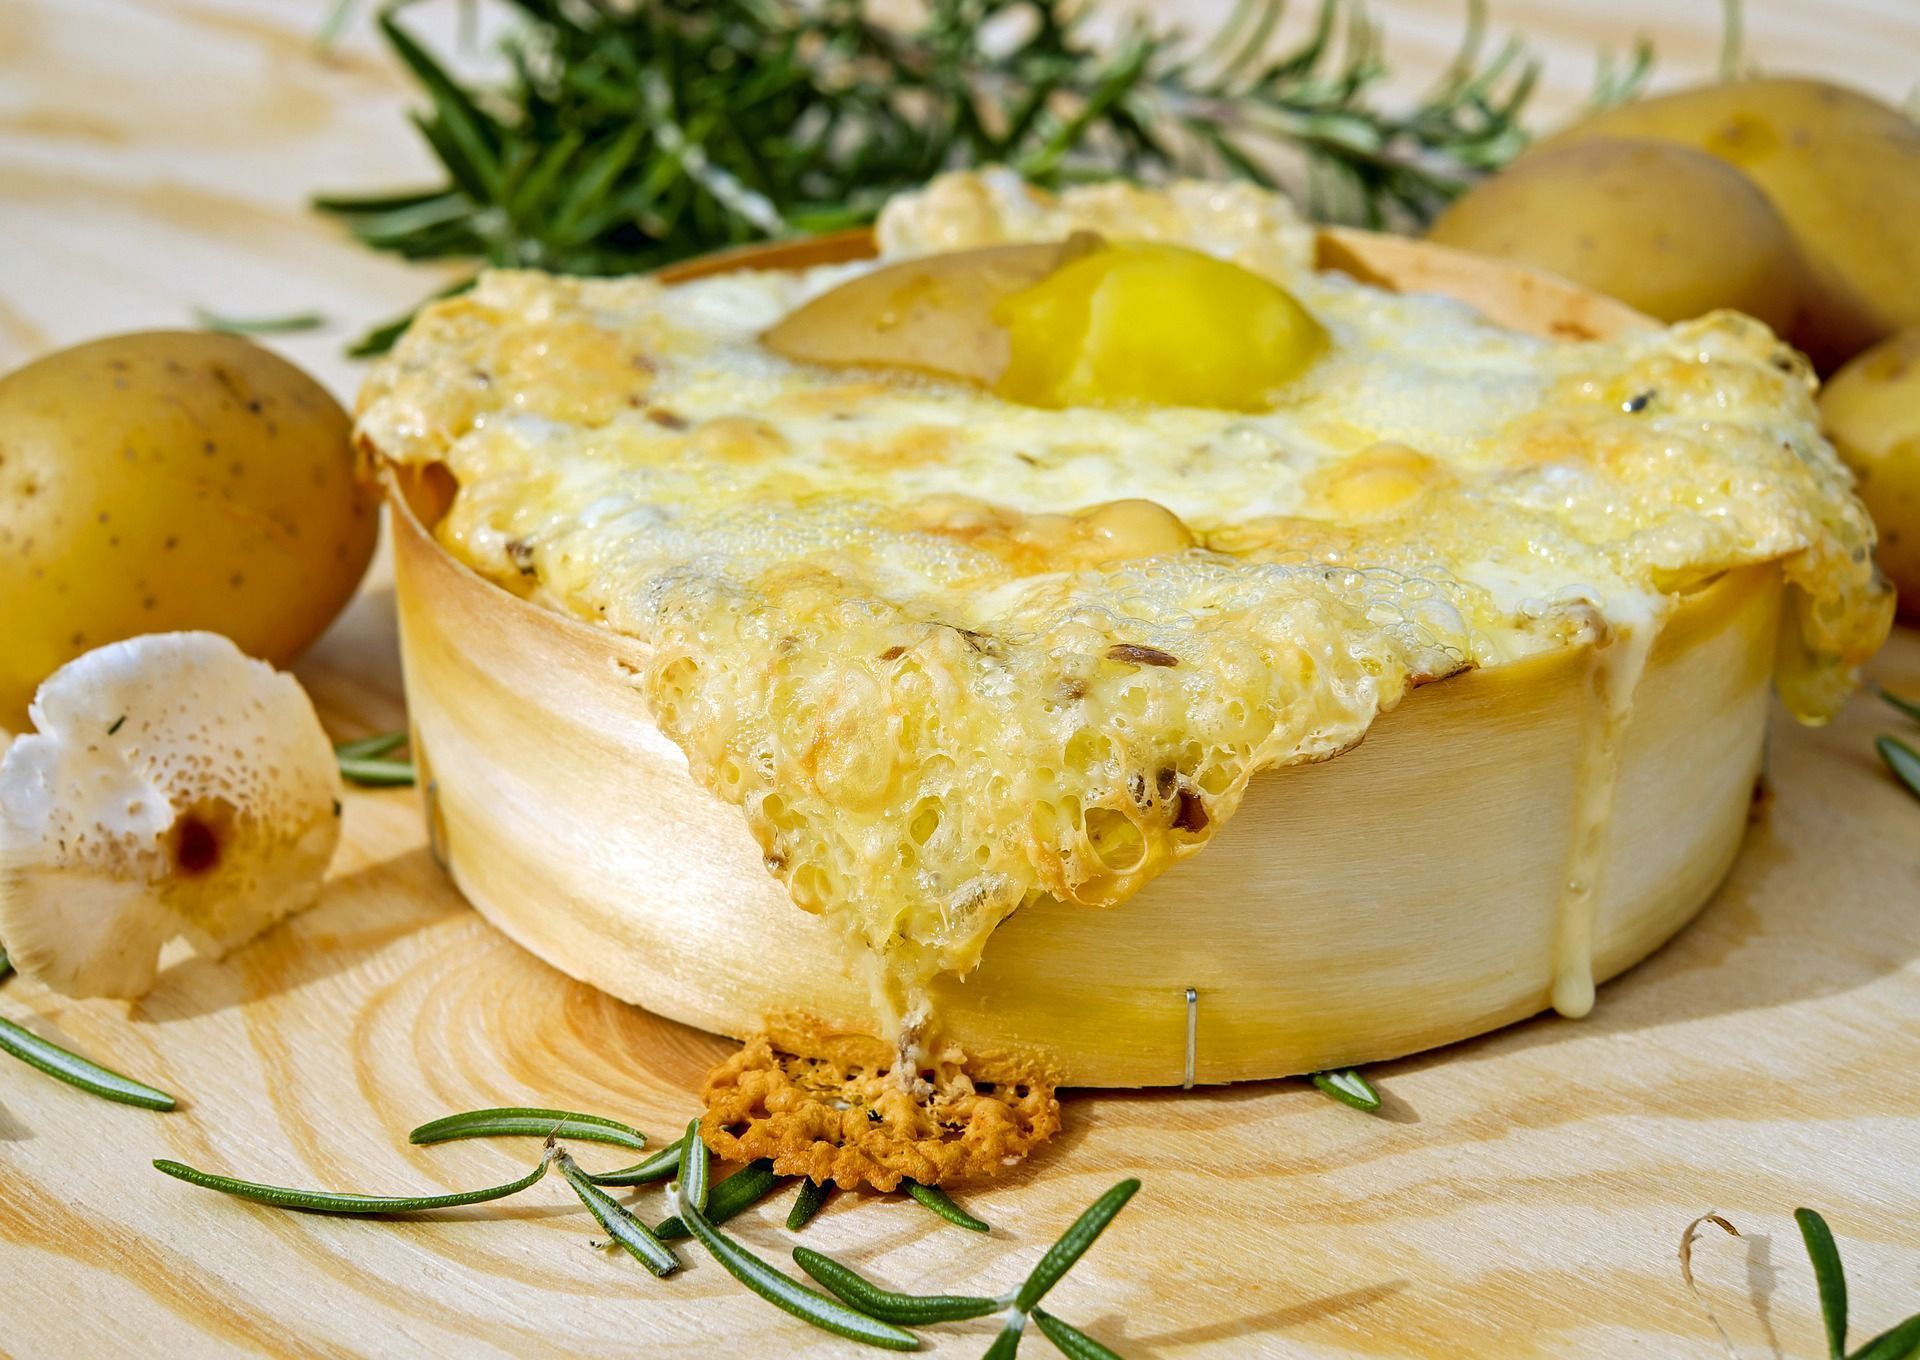 oven-baked-cheese-2817144_1920